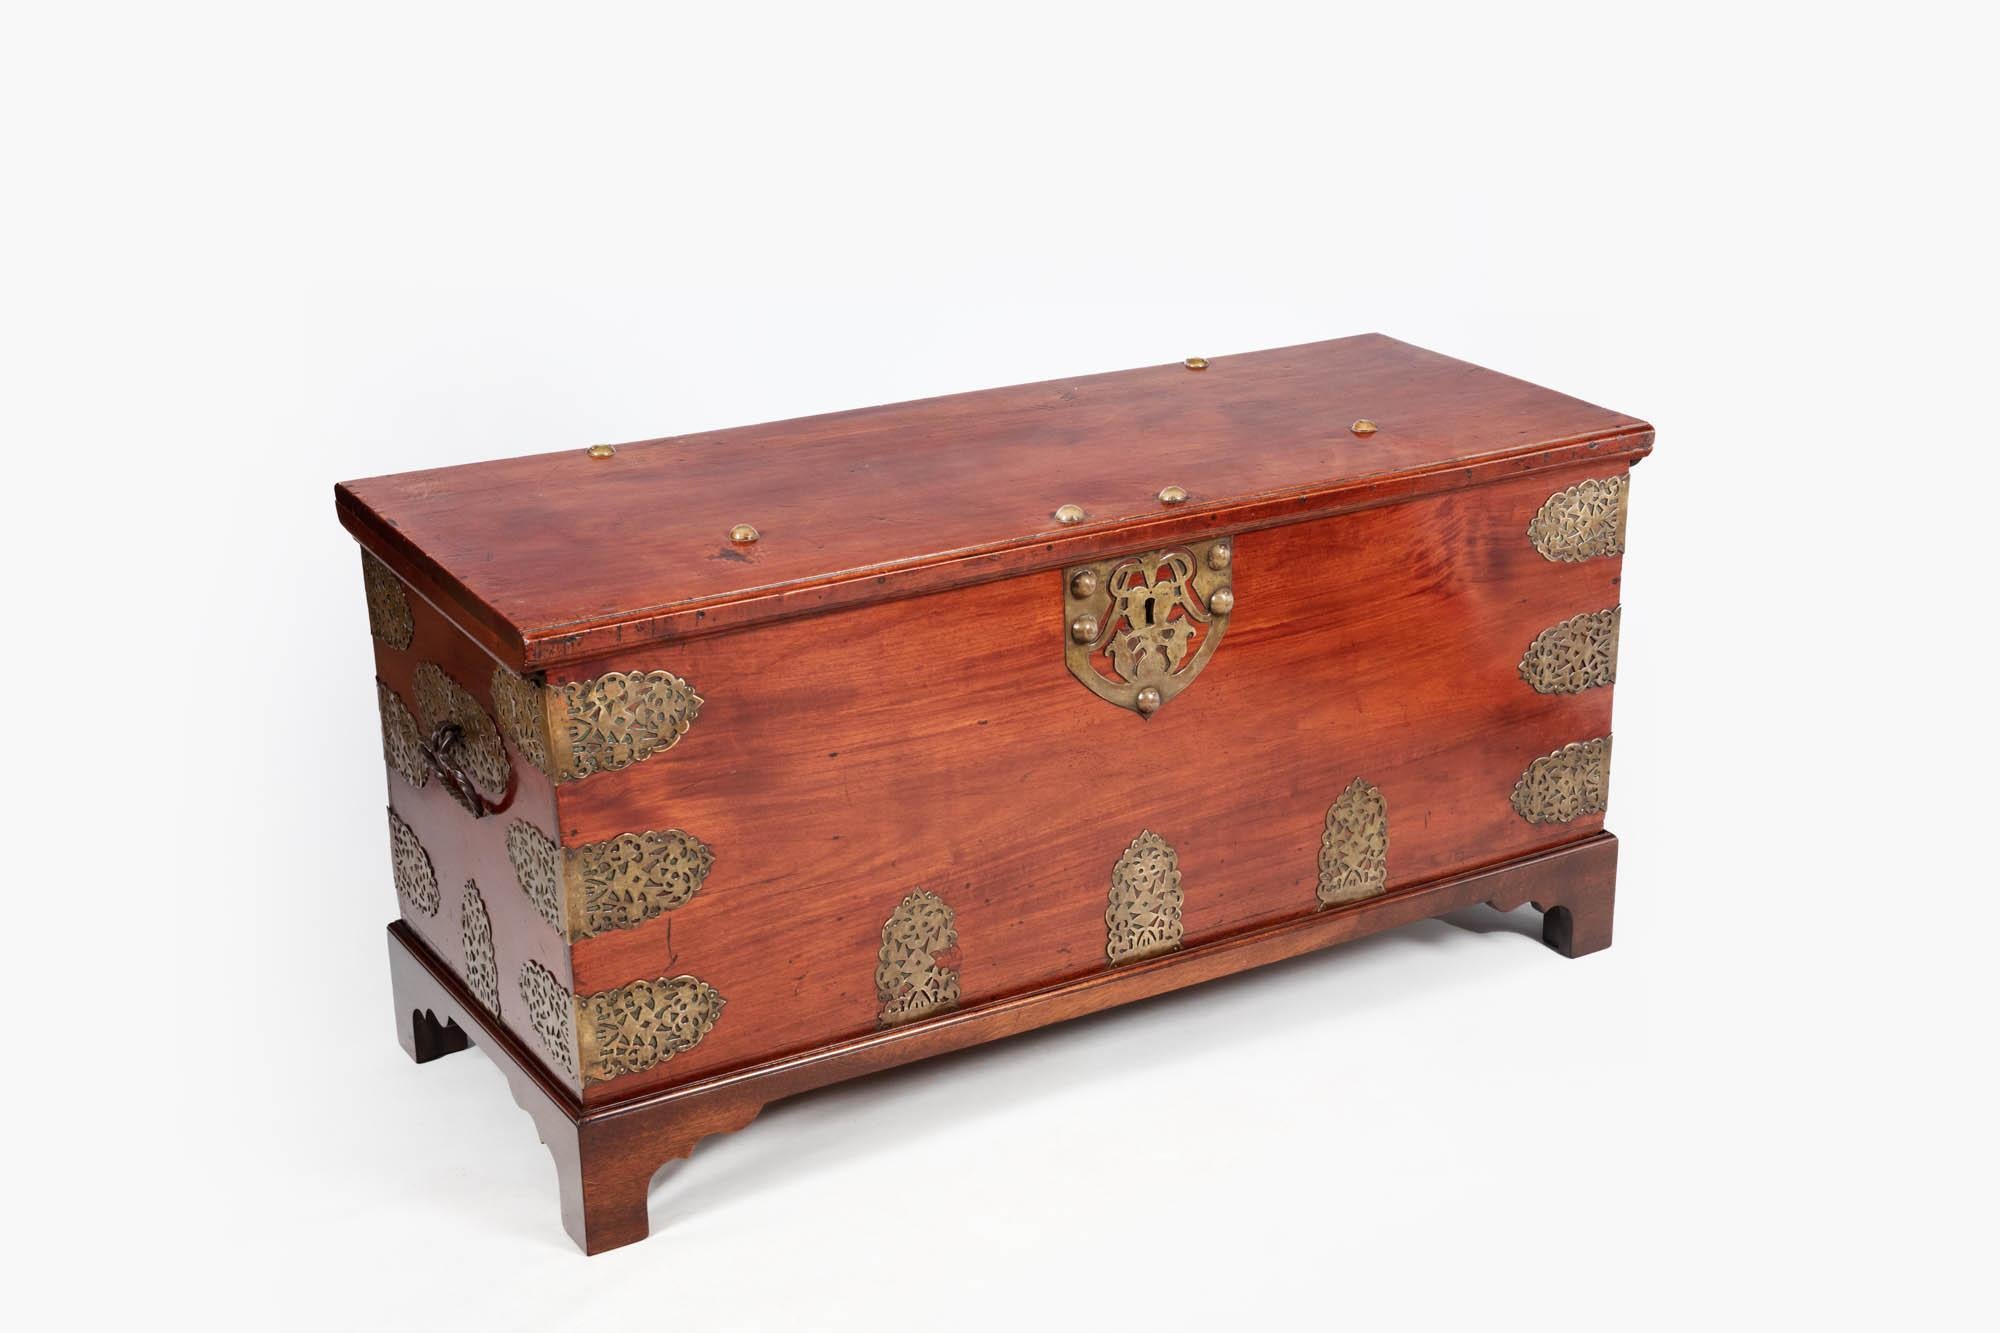 19th Century brass bound hardwood chest decorated with shaped pierced mounts, with hinged molded rectangular top, the front with a pierced lock-plate, nail head decoration and the sides with carrying handles. The piece sits on ogee bracket feet. The